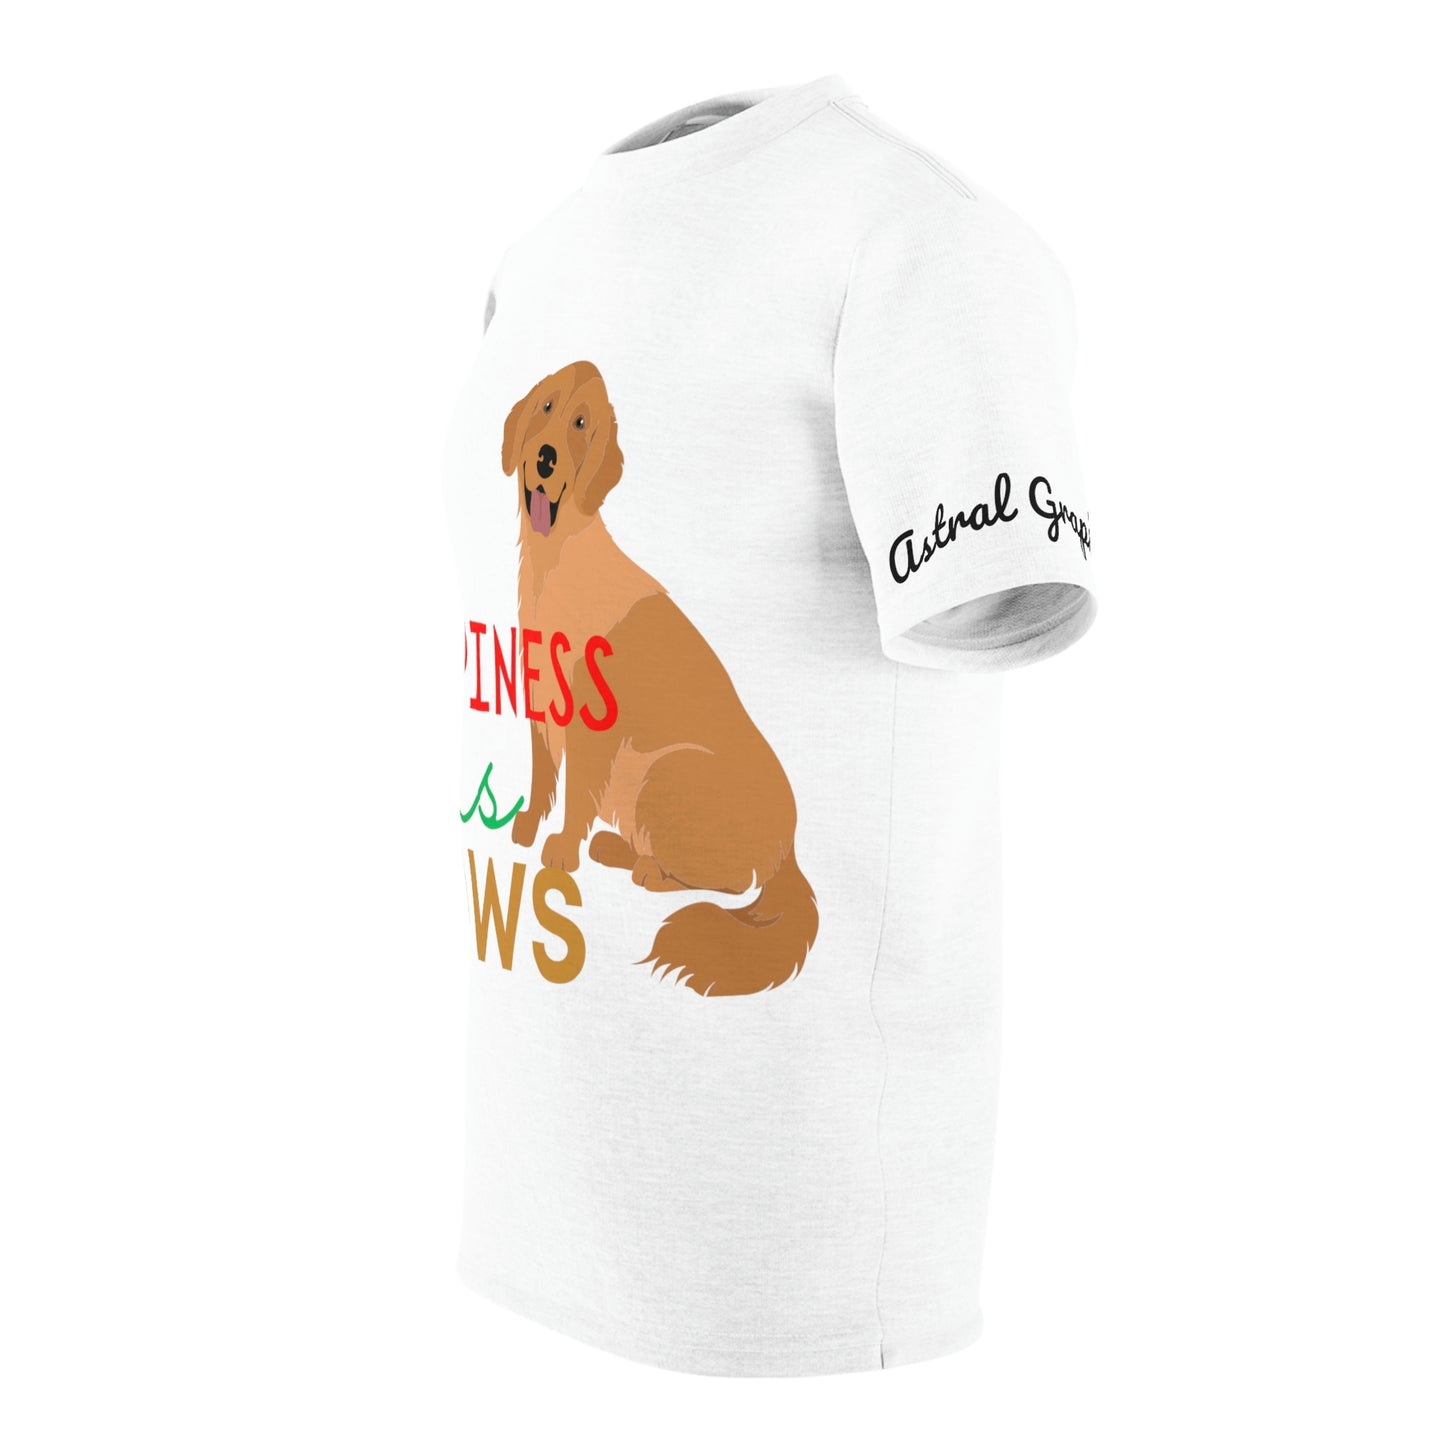 Animal Collection - Unisex AOP Cut & Sew Tee - Has Paws v2 in White